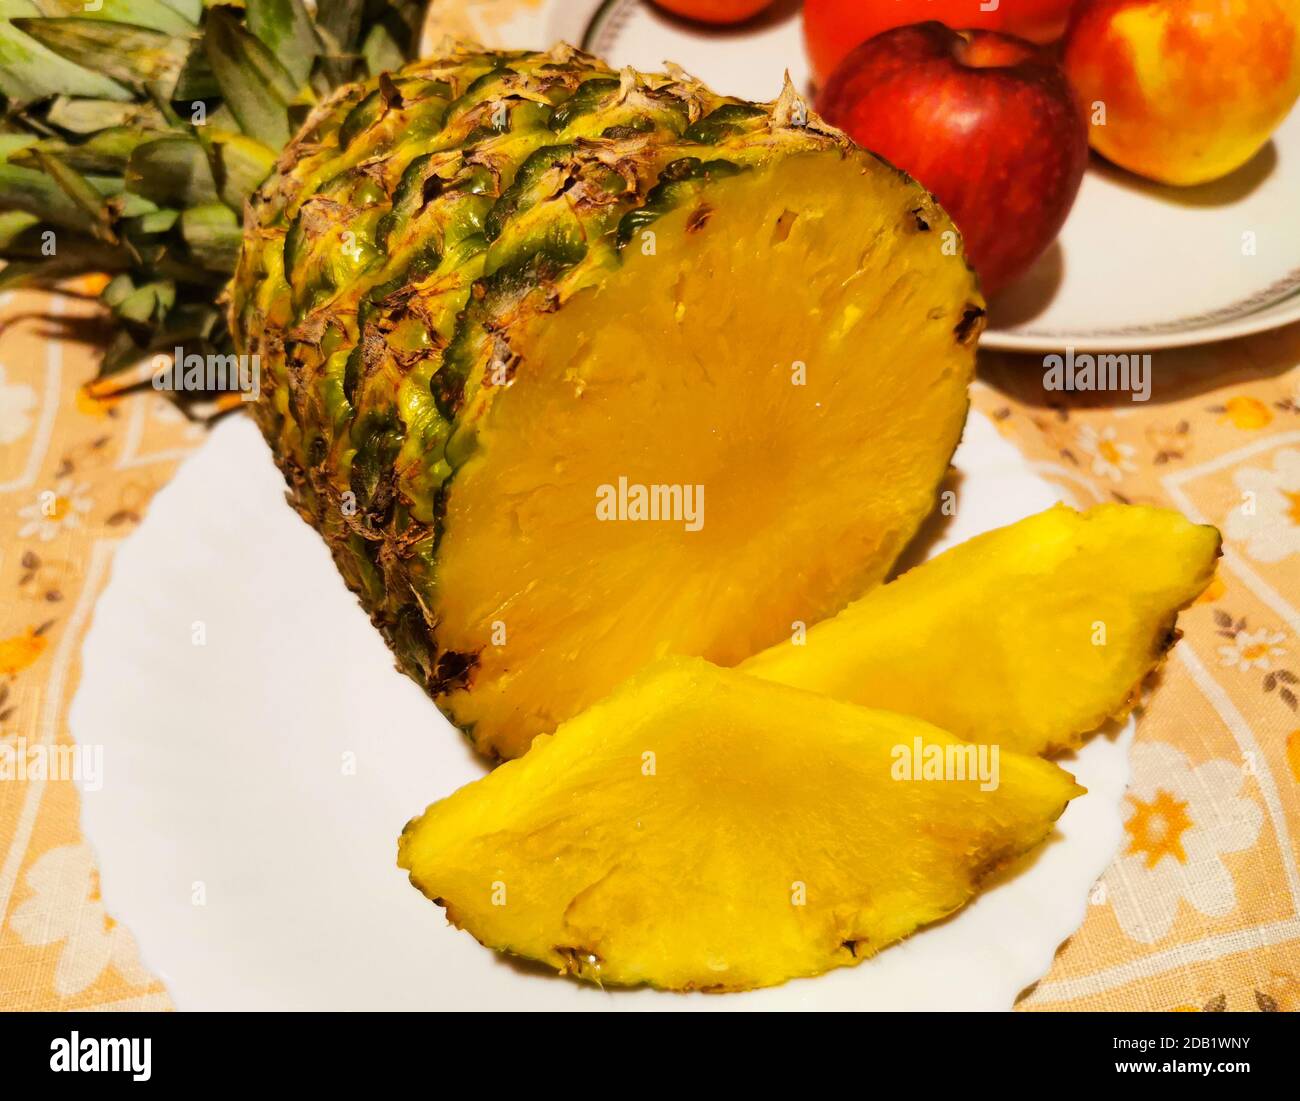 Pineapple fruit on white plate and red apples in the background Stock Photo